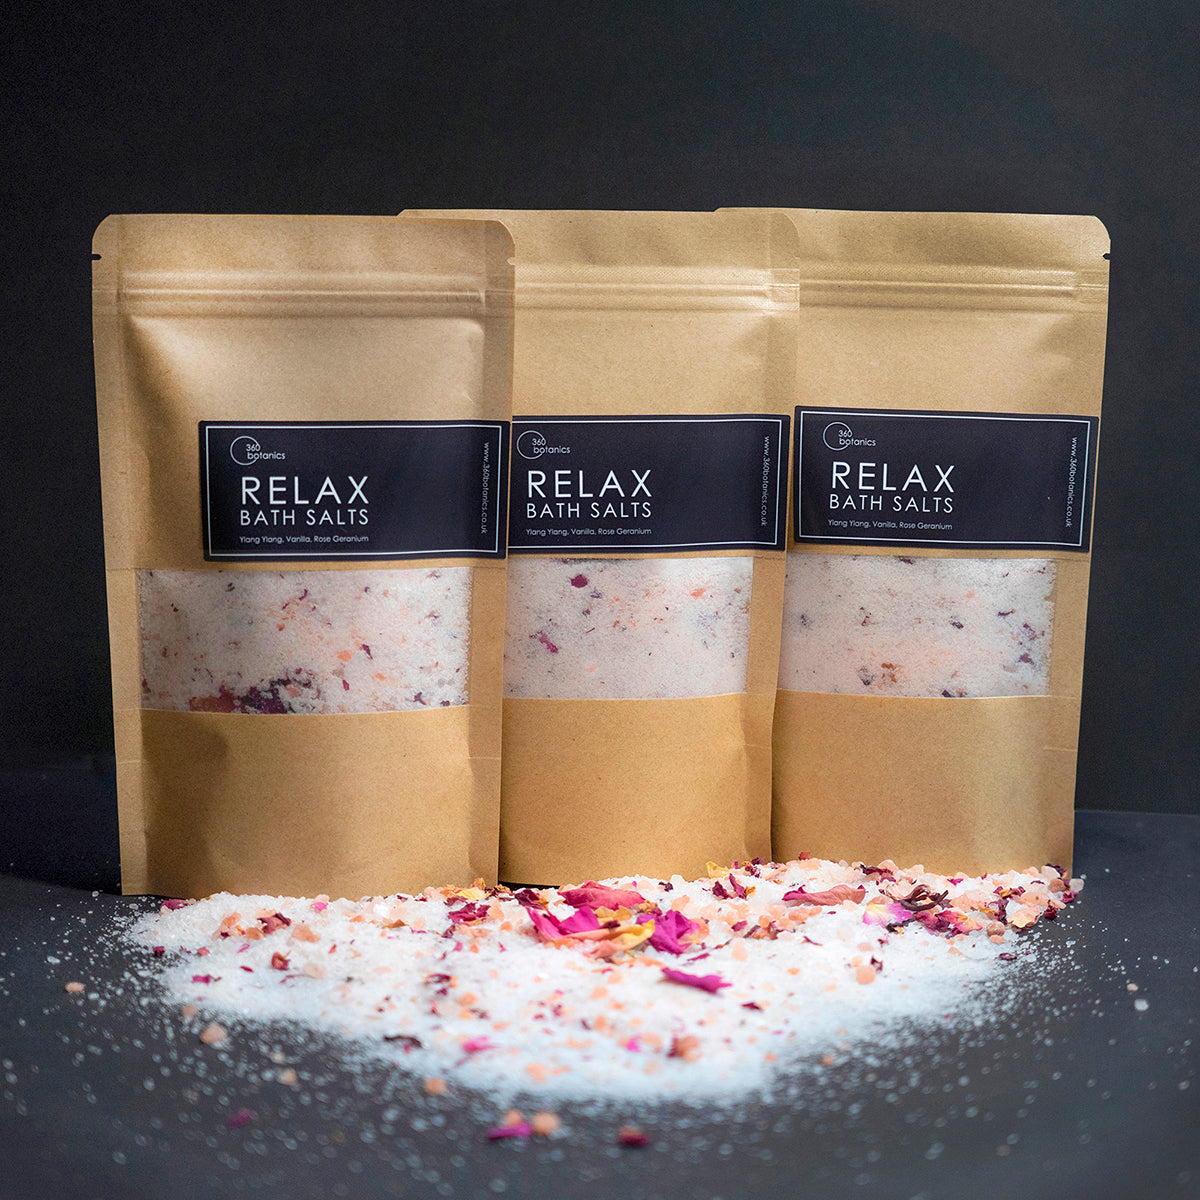 Three kraft paper pouches of '360 Botanics RELAX BATH SALTS' stand in a row against a dark background. The transparent window of each pouch reveals a mix of bath salts infused with petals and herbs. Scattered in front on a black surface is a blend of the colorful salts and botanicals, highlighting the natural ingredients of Ylang Ylang, Vanilla, and Rose Geranium for a calming bath experience